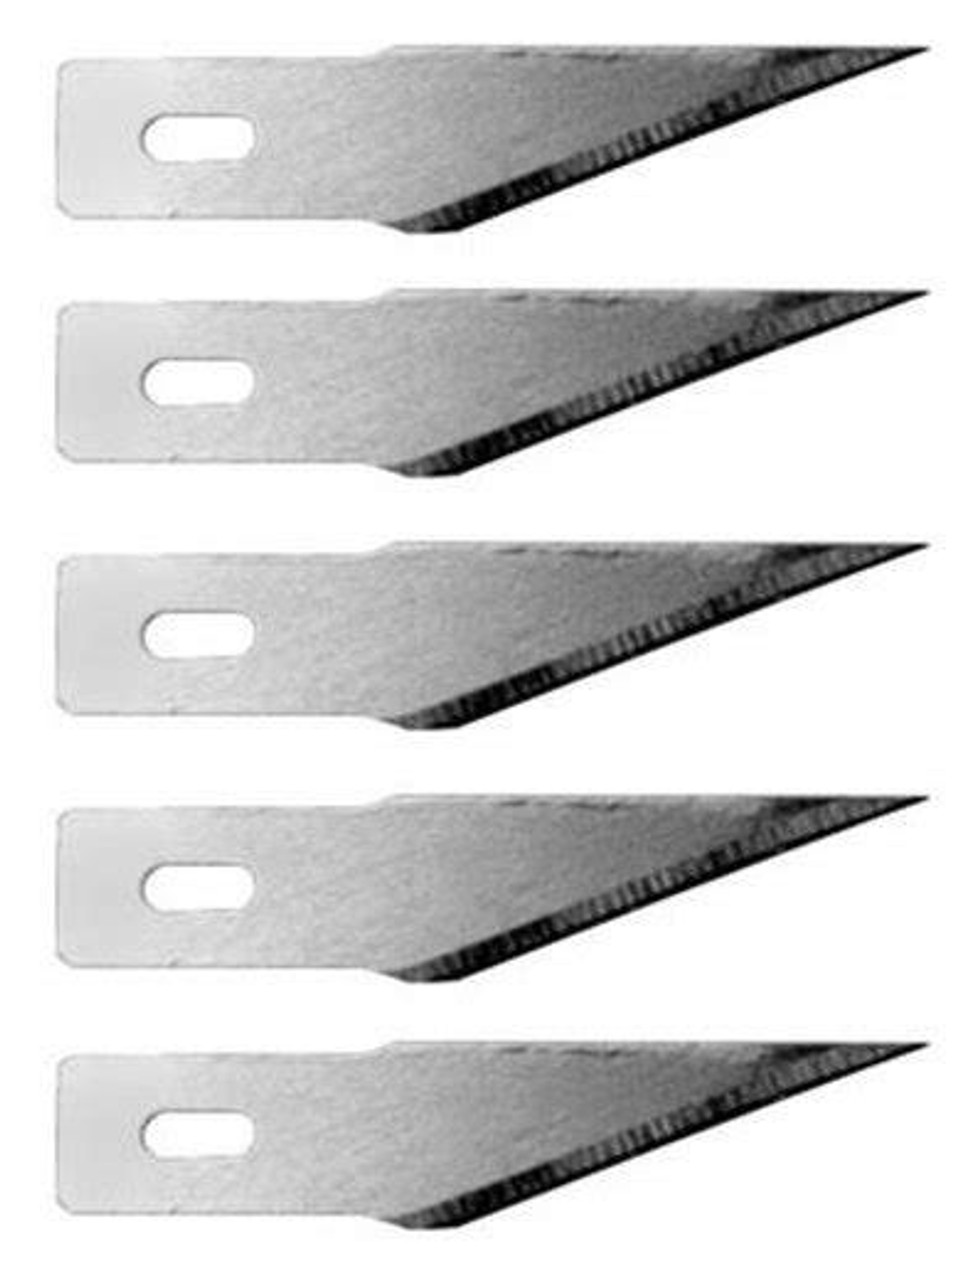 Uxcell Exacto Knife Blades #10 Hobby Knife Blades Precision Exacto Blades Hobby Knife Blade Refills 100 Pack, Silver